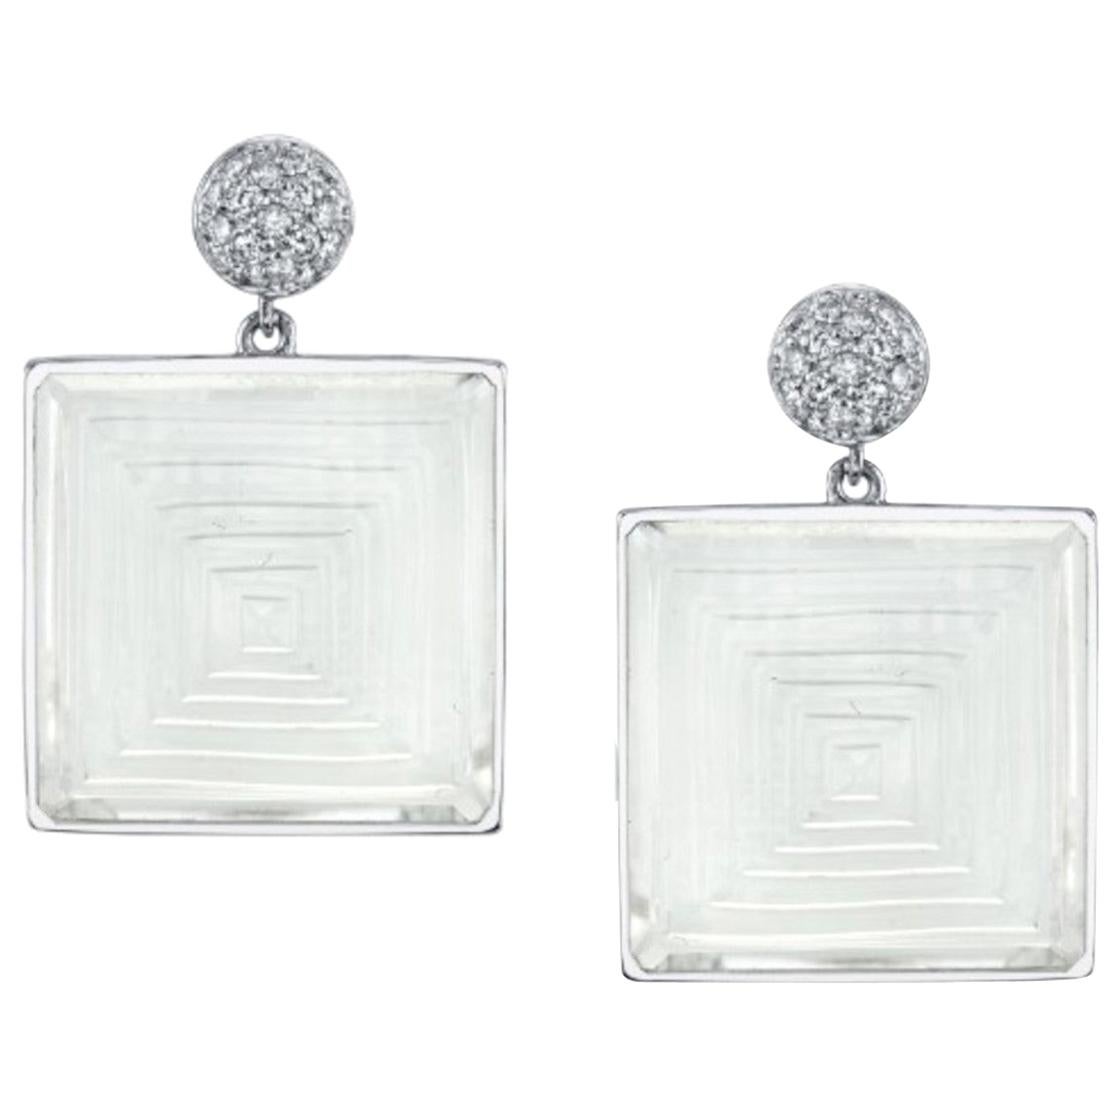 Rock Crystal Pyramid and Diamond Drop Earrings in White Gold, 48 Carats Total For Sale